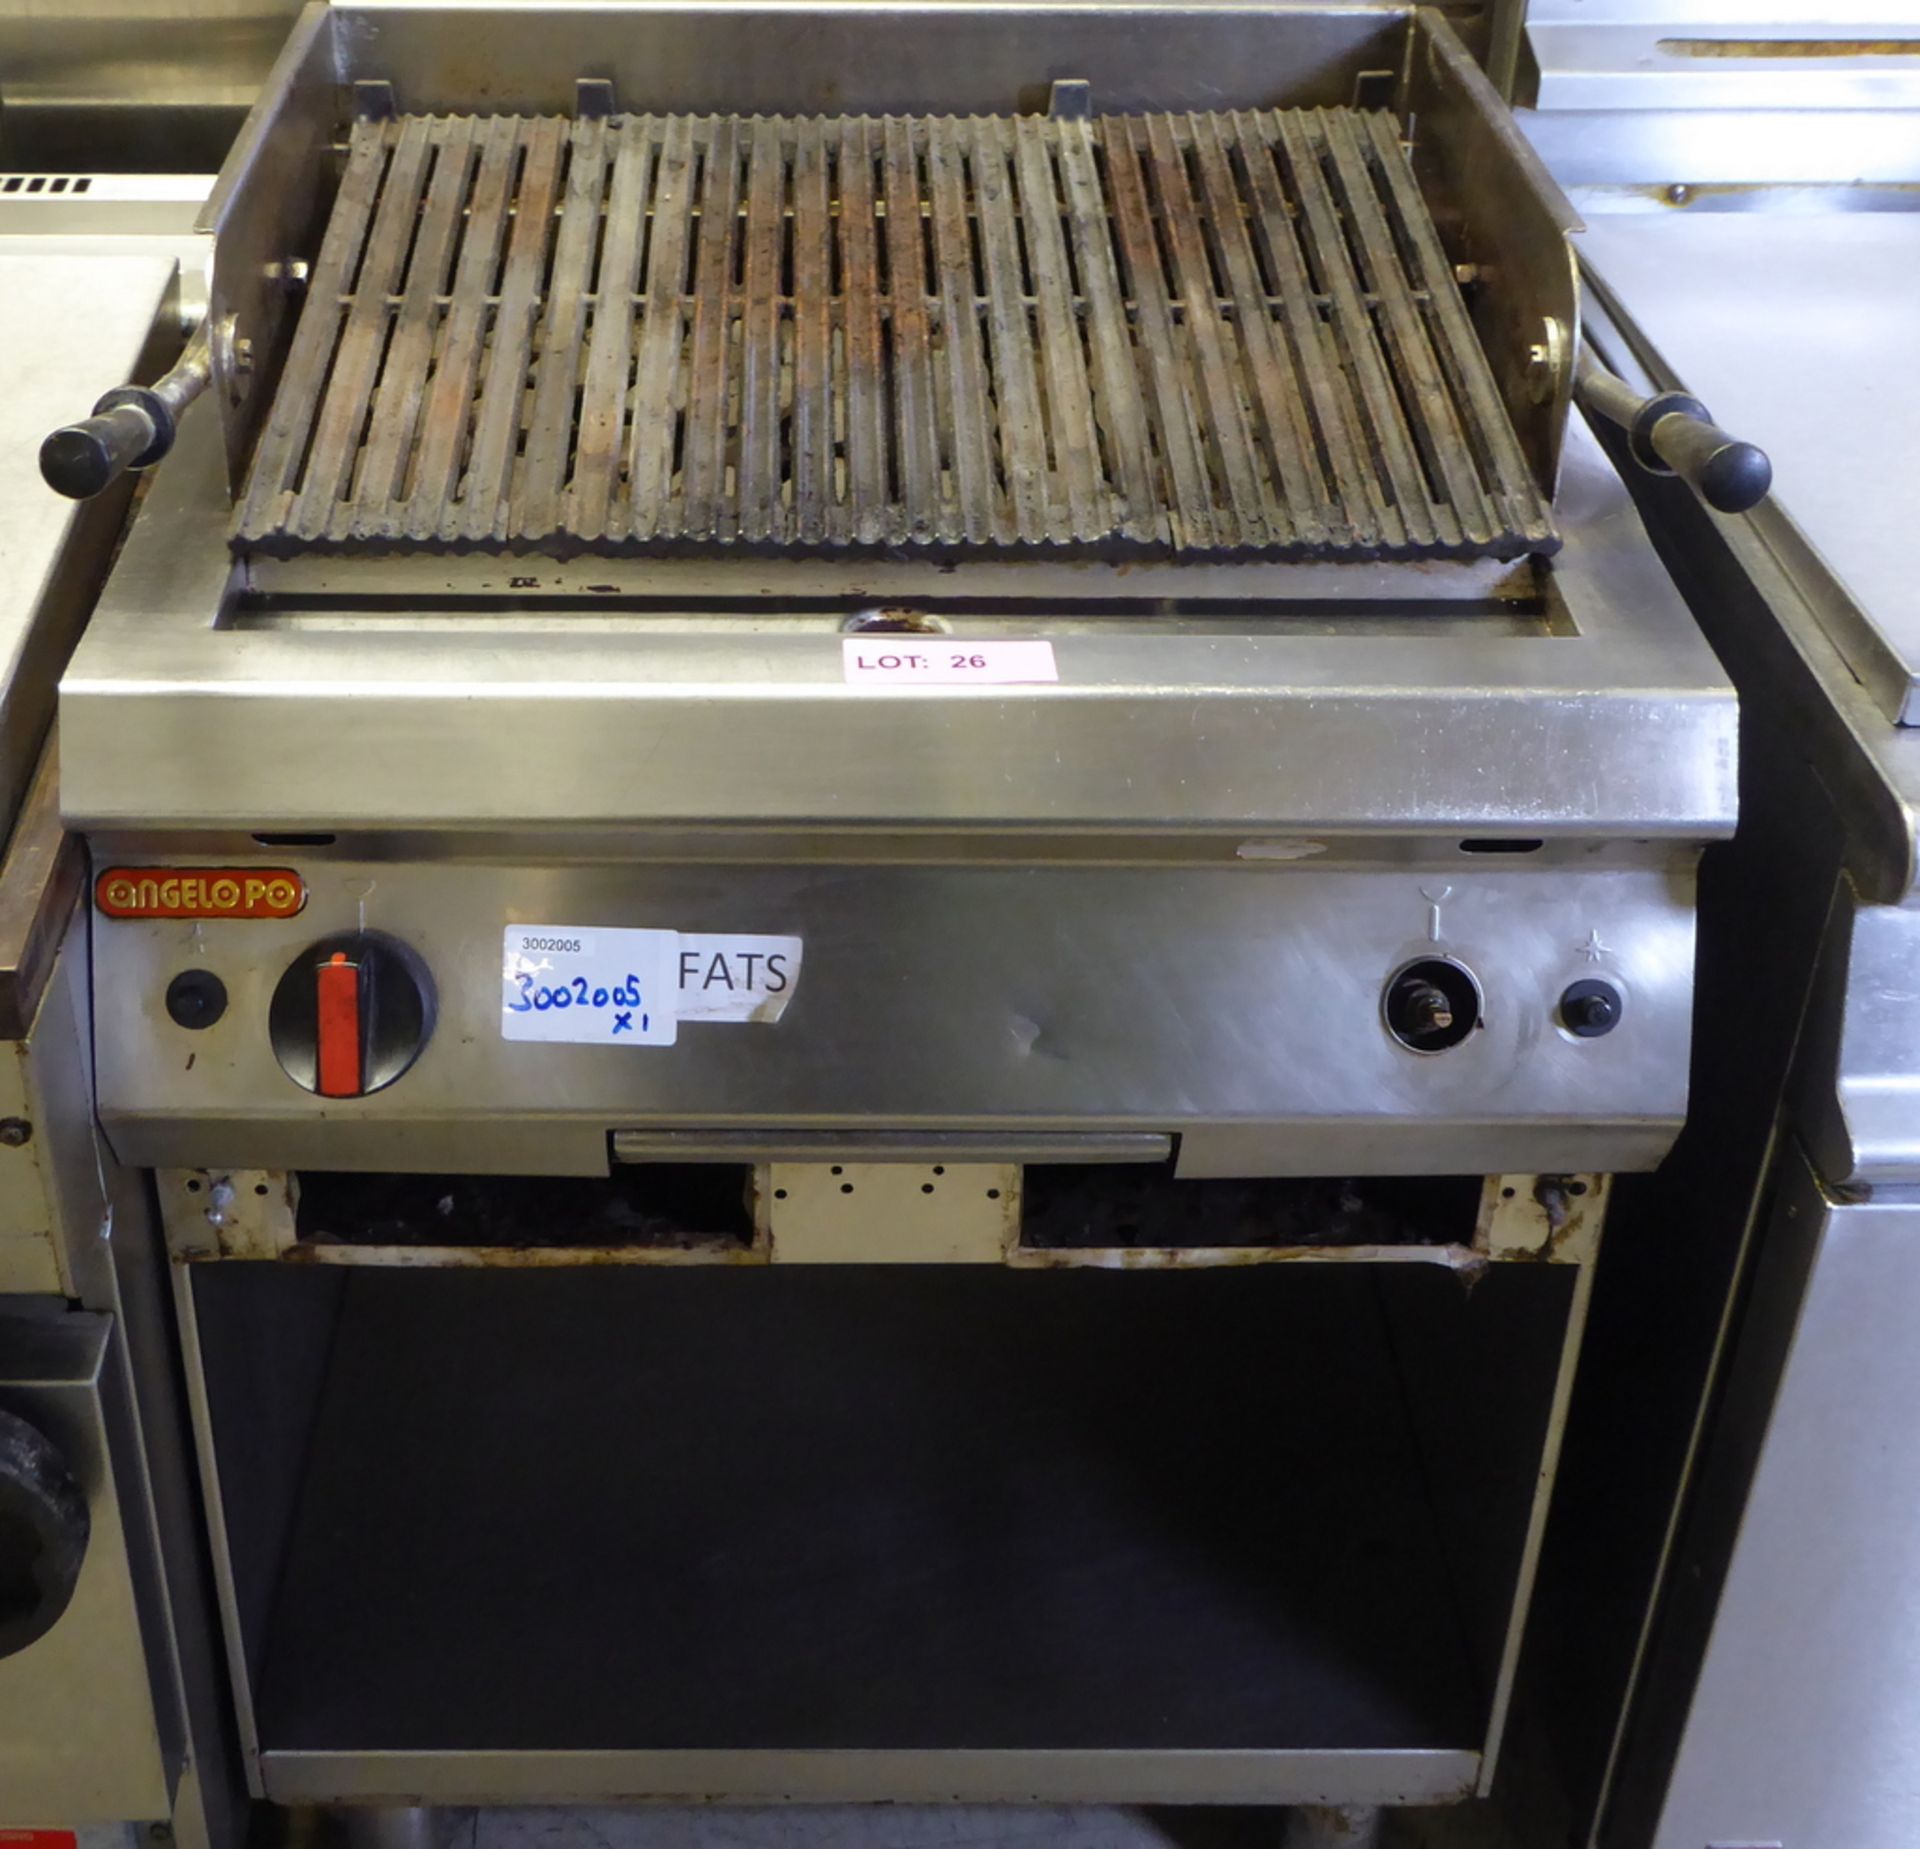 Angelo Po Gas Chargrill 70 x 63 x 102cm (WxDxH) - Please note this is missing 1 knob